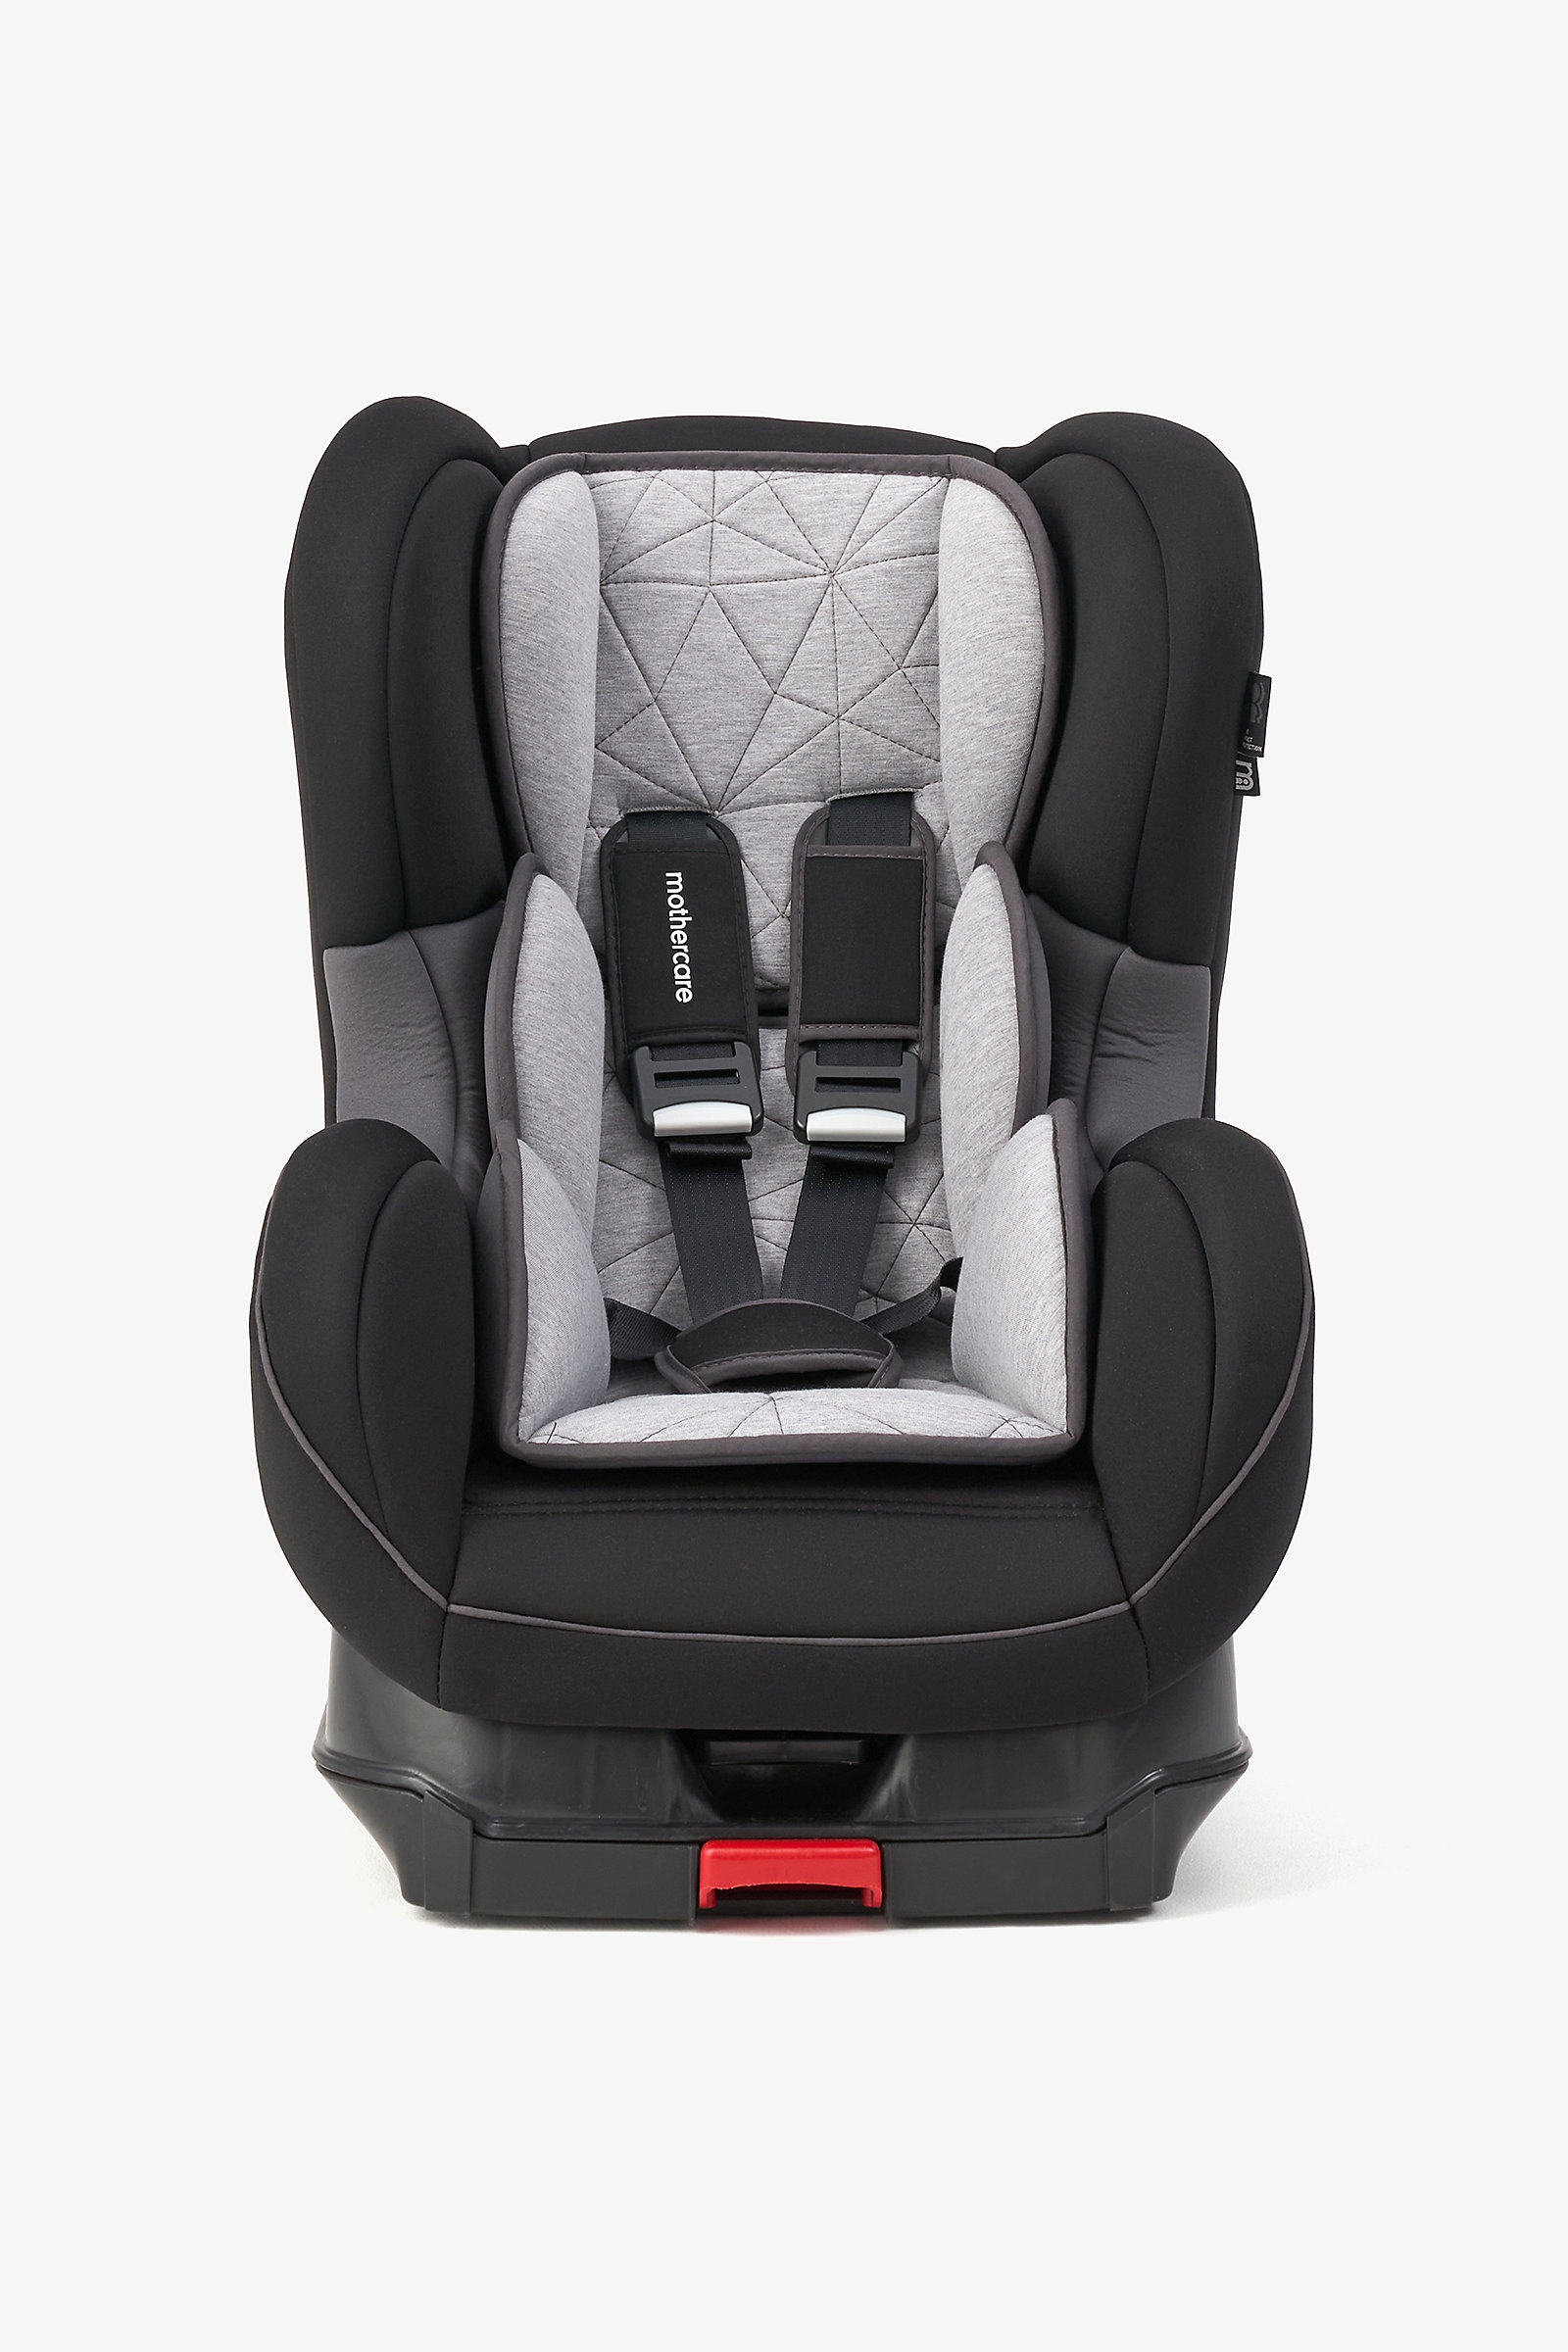 Mothercare Sport Isofix Car Seat Charcoal Grey